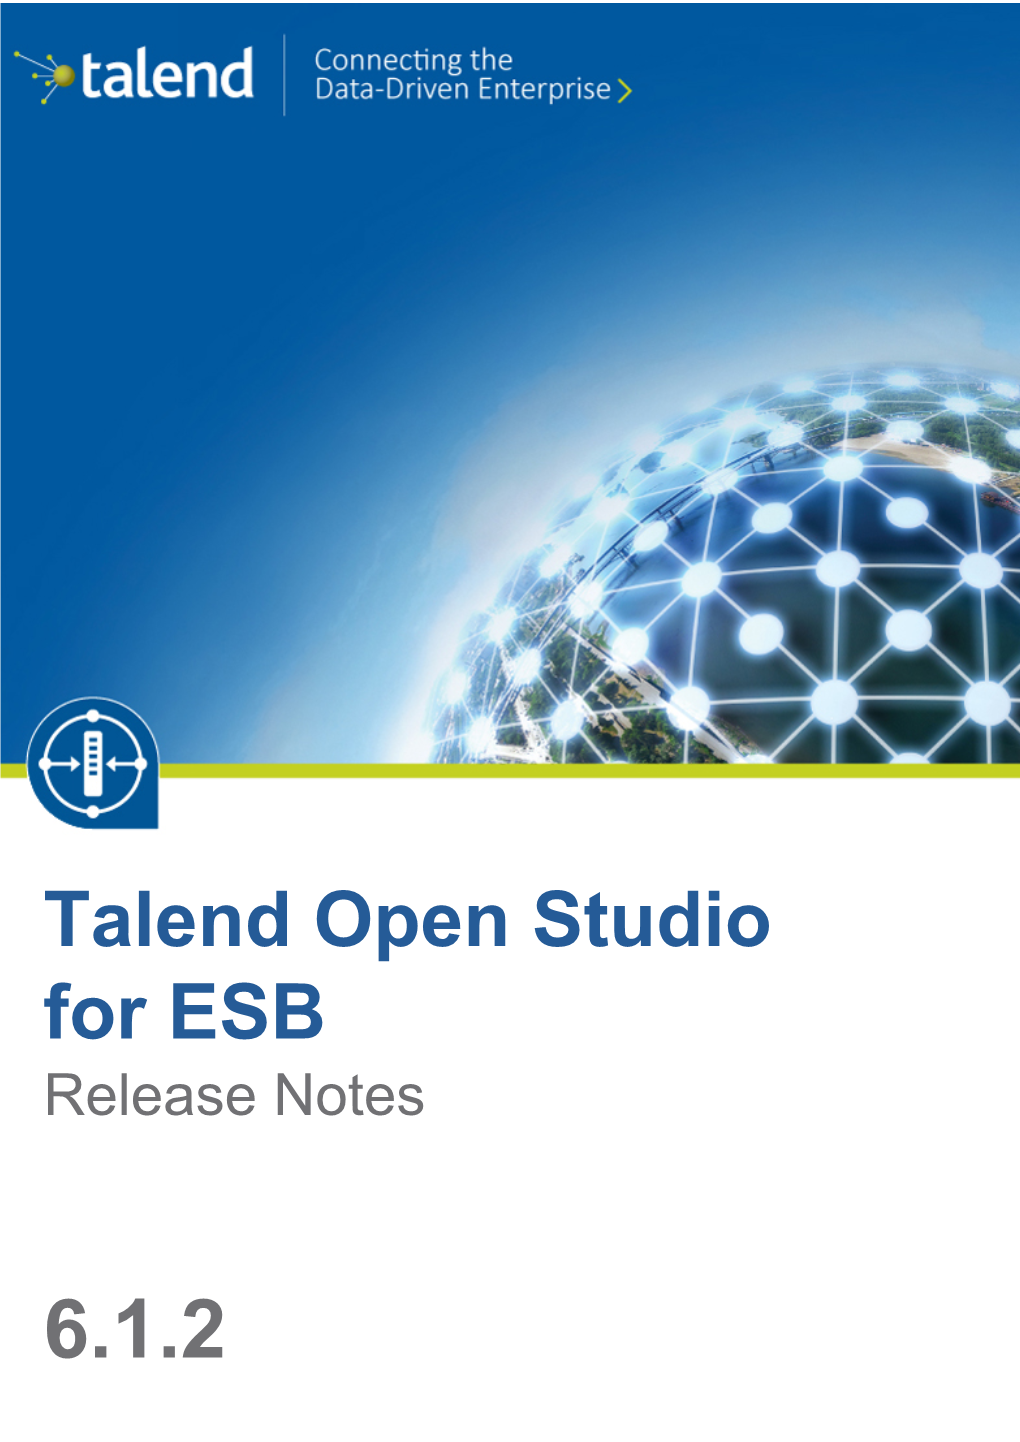 Talend Open Studio for ESB Release Notes